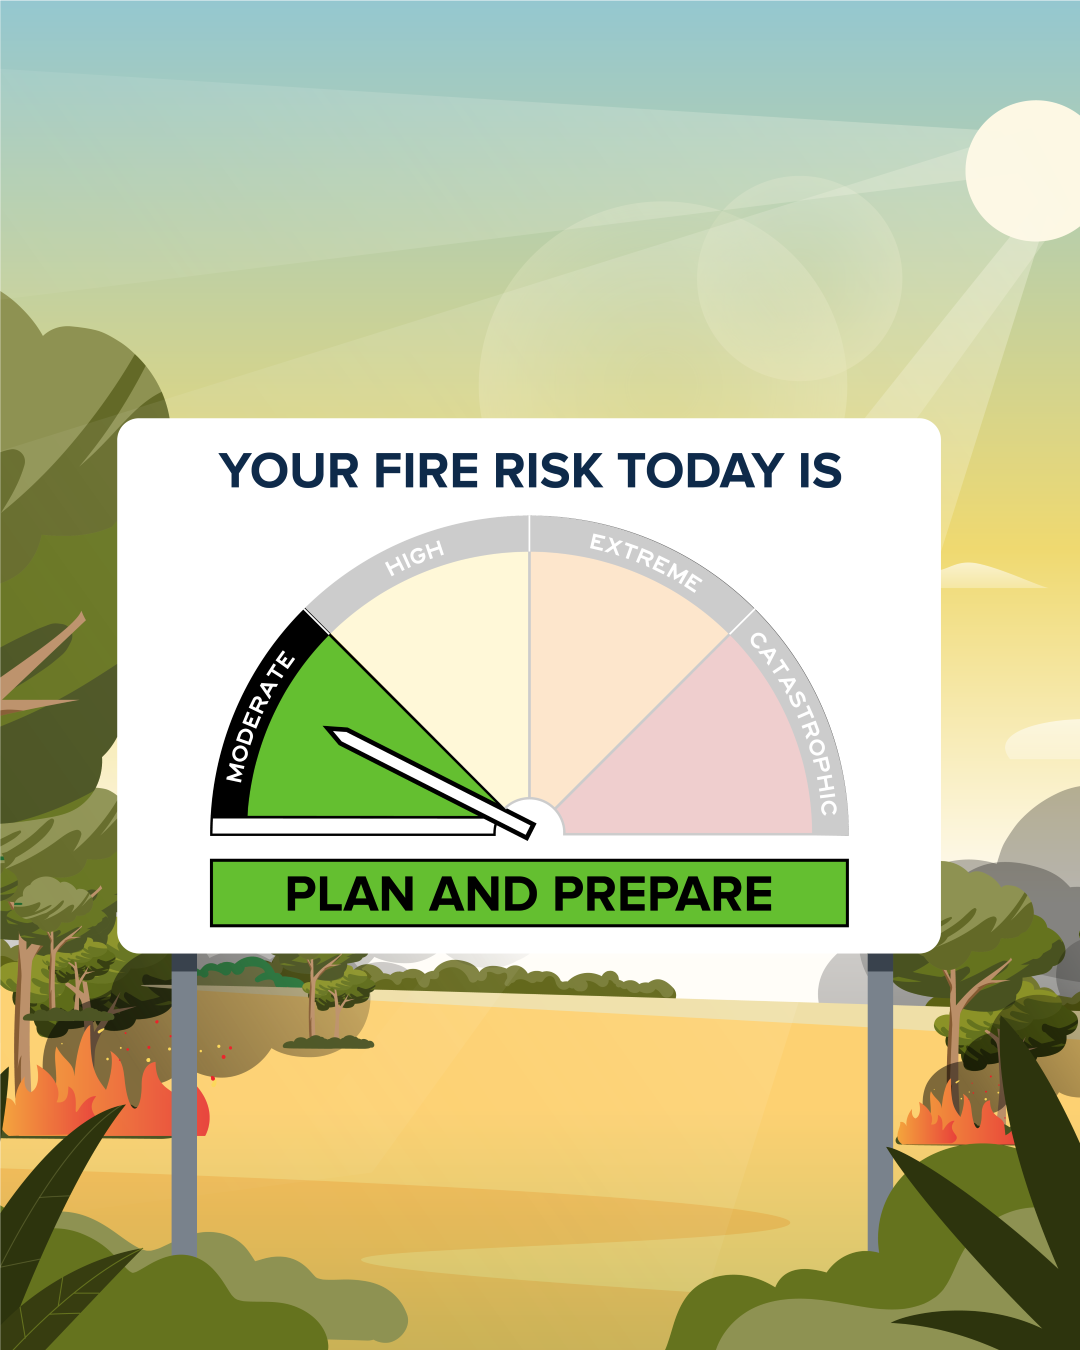 Fire Danger Rating scale showing that today is rated Moderate